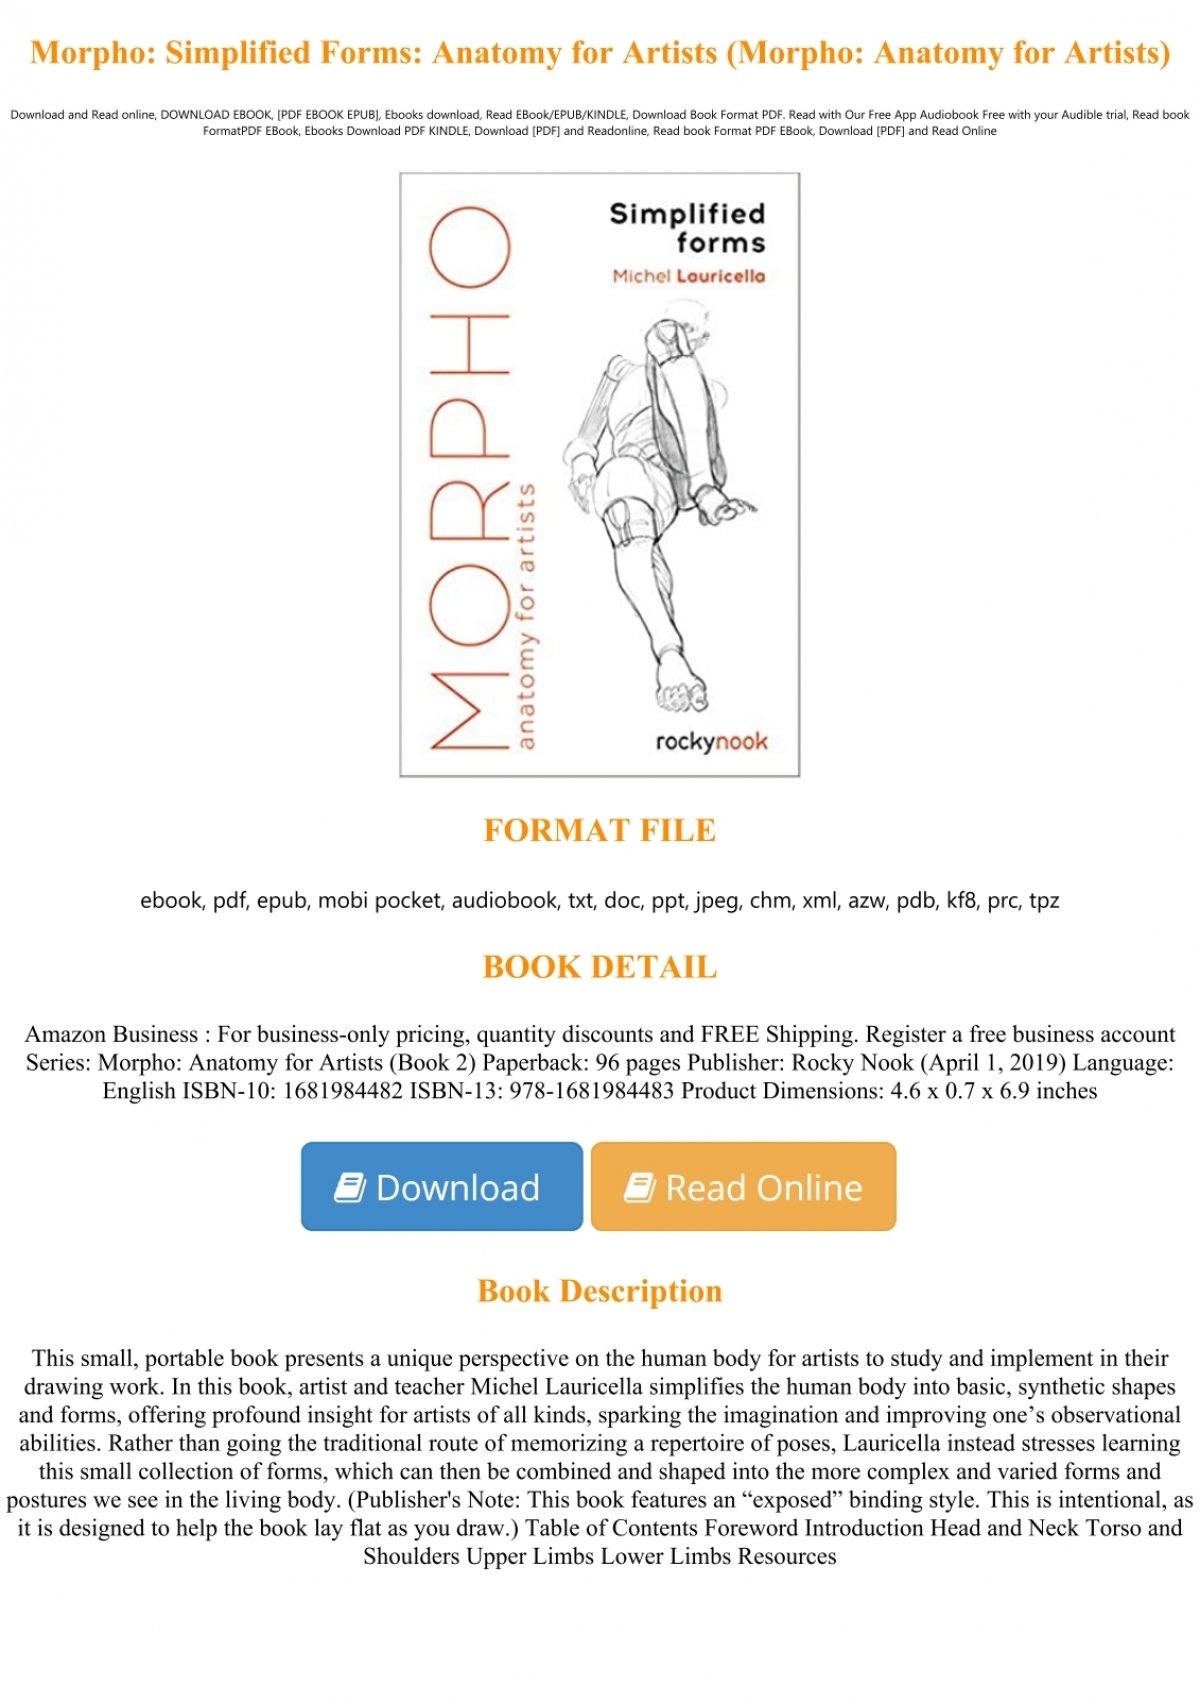 download-pdf-morpho-simplified-forms-anatomy-for-artists-morpho